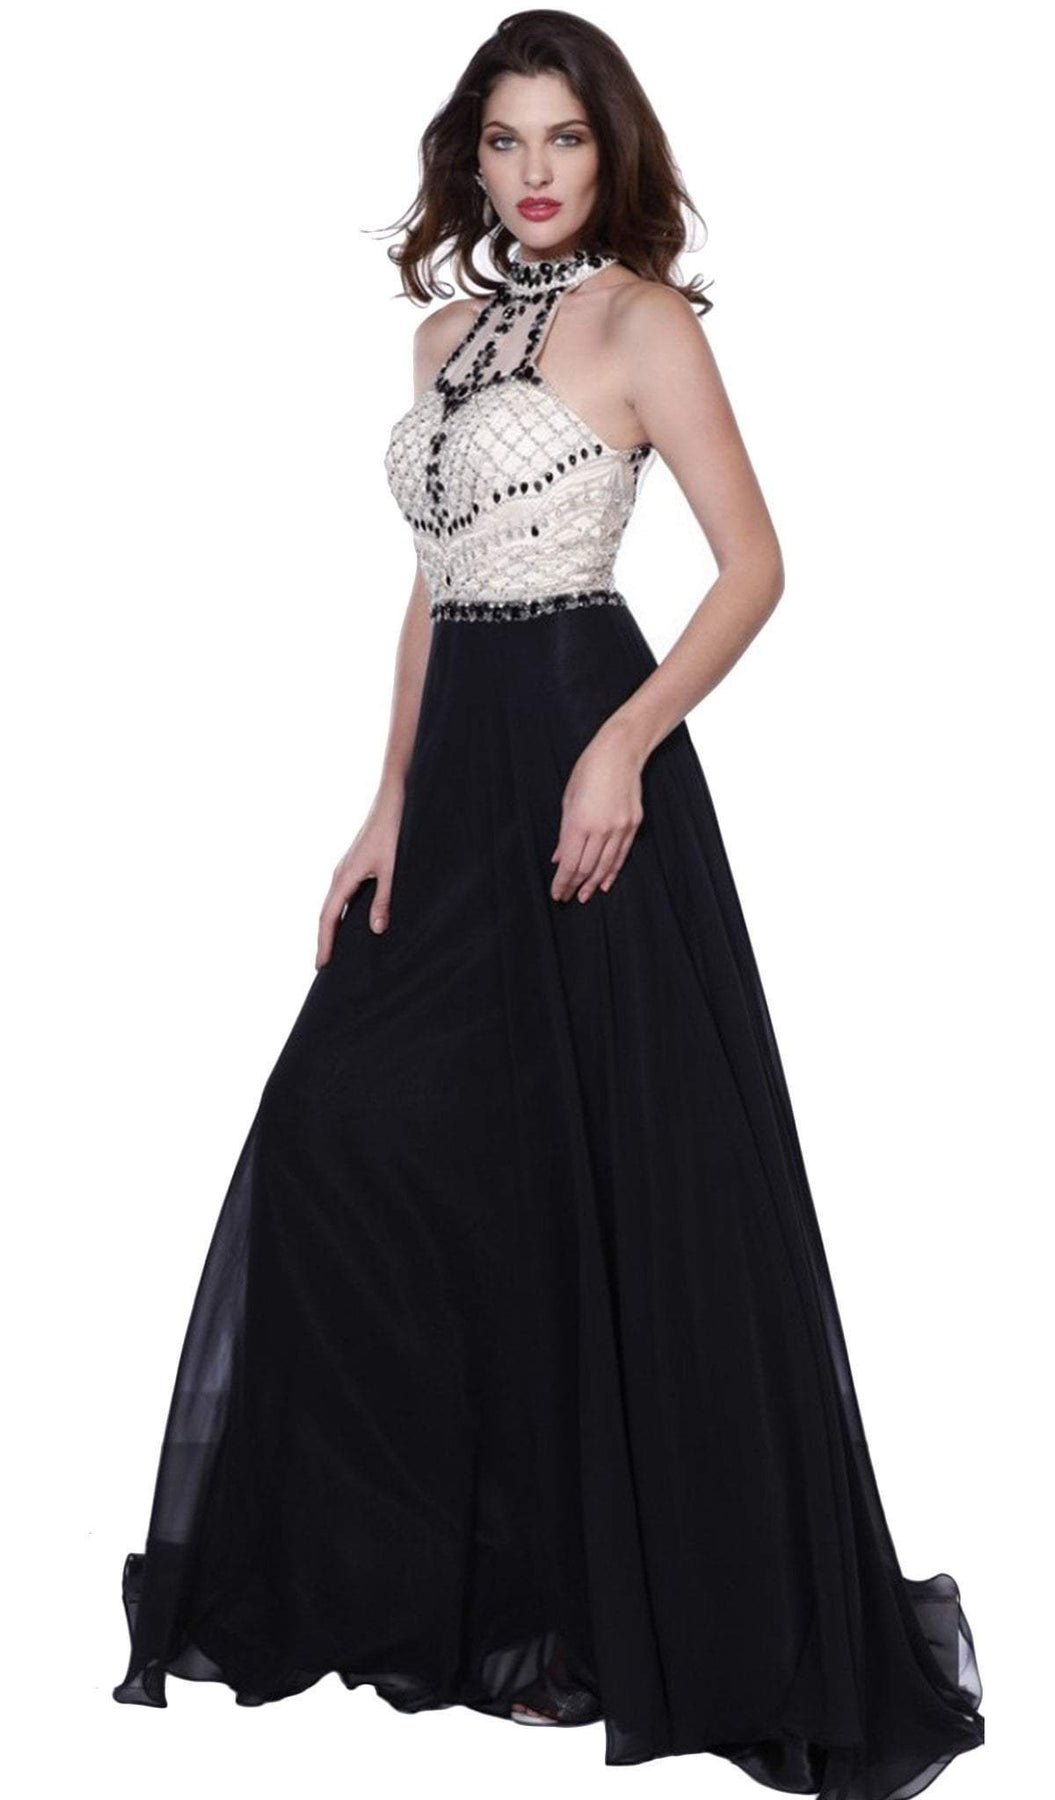 Nox Anabel - 8200 Bejeweled Halter Chiffon A-line Dress Special Occasion Dress XS / Black